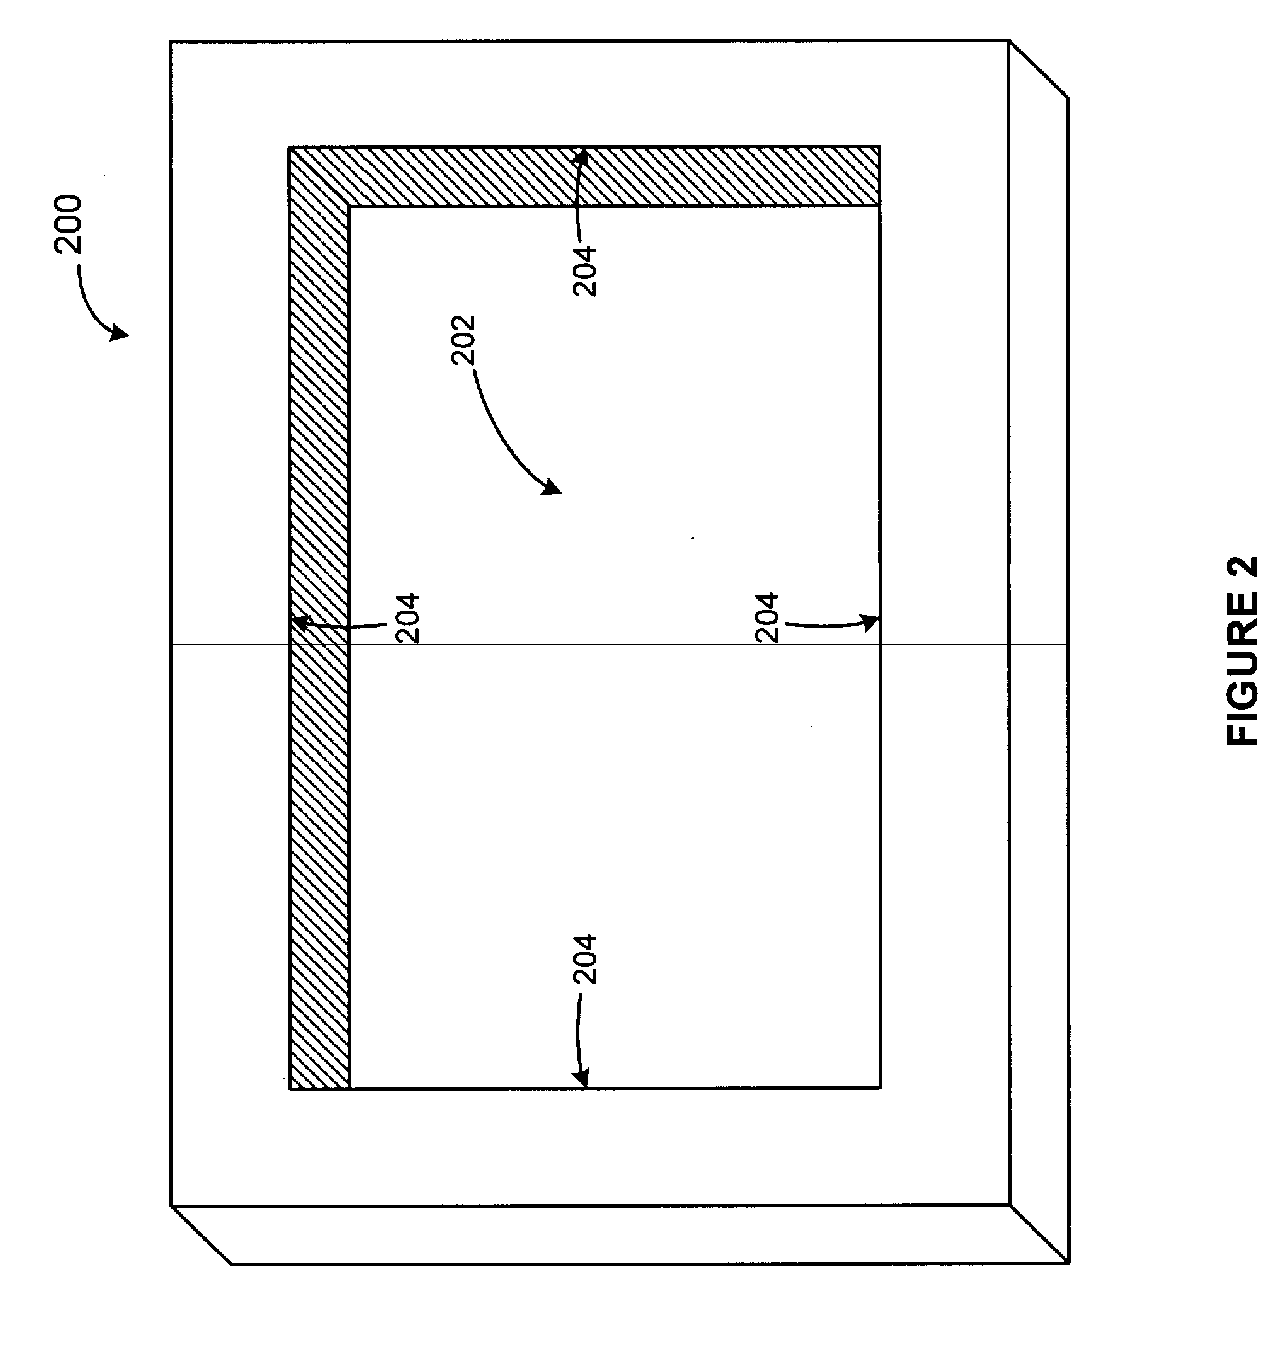 A system and method for providing an RFID transaction device